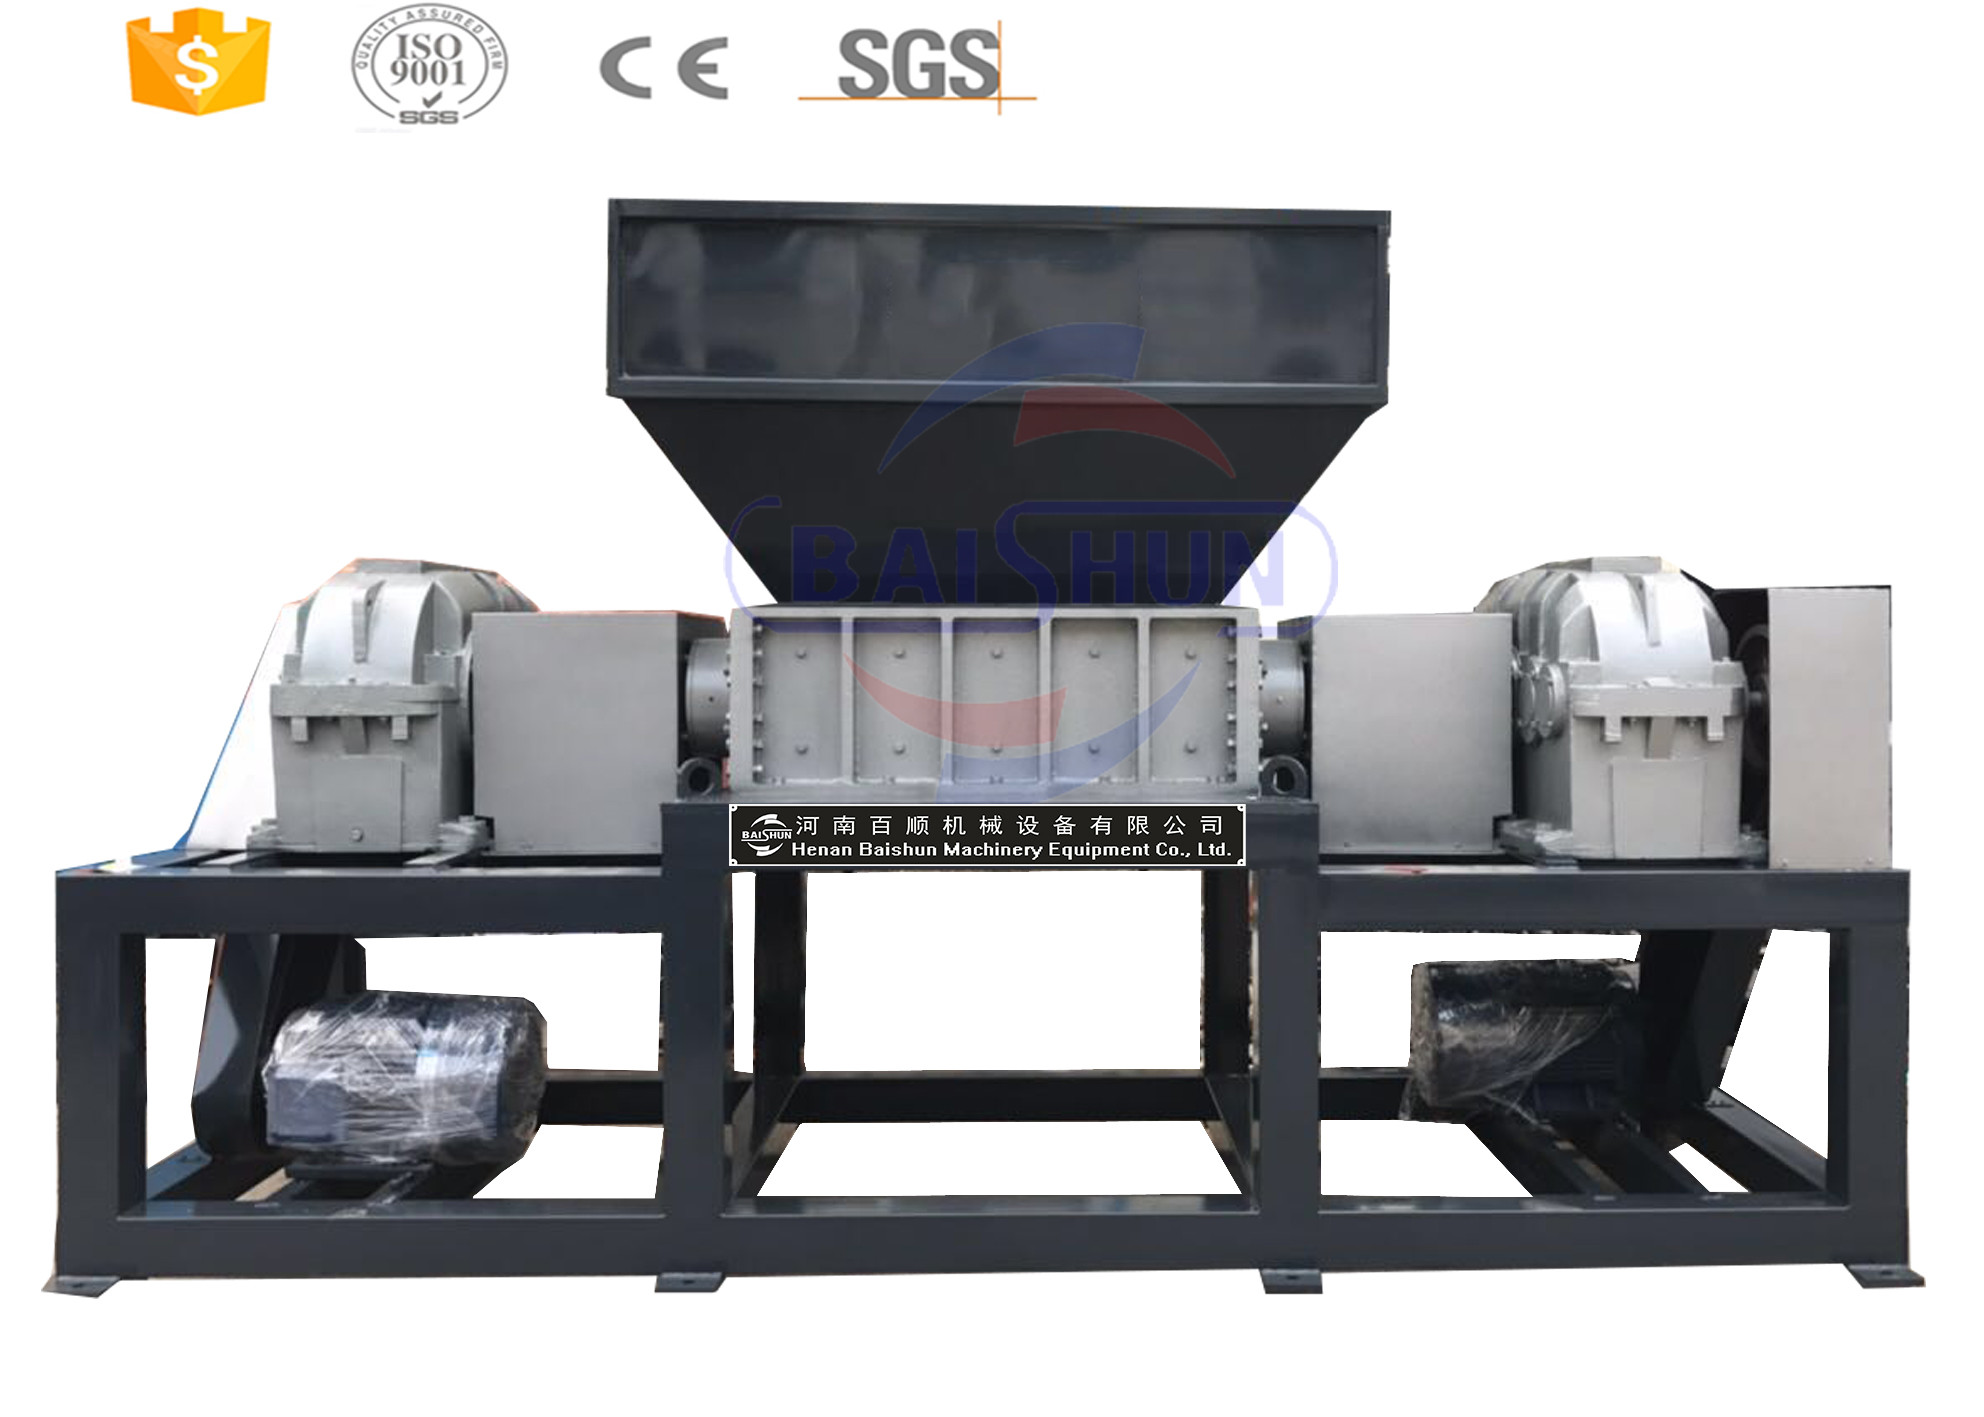  High Duty Plastic Waste Shredding Machine For Paint Buckets And Wood Manufactures